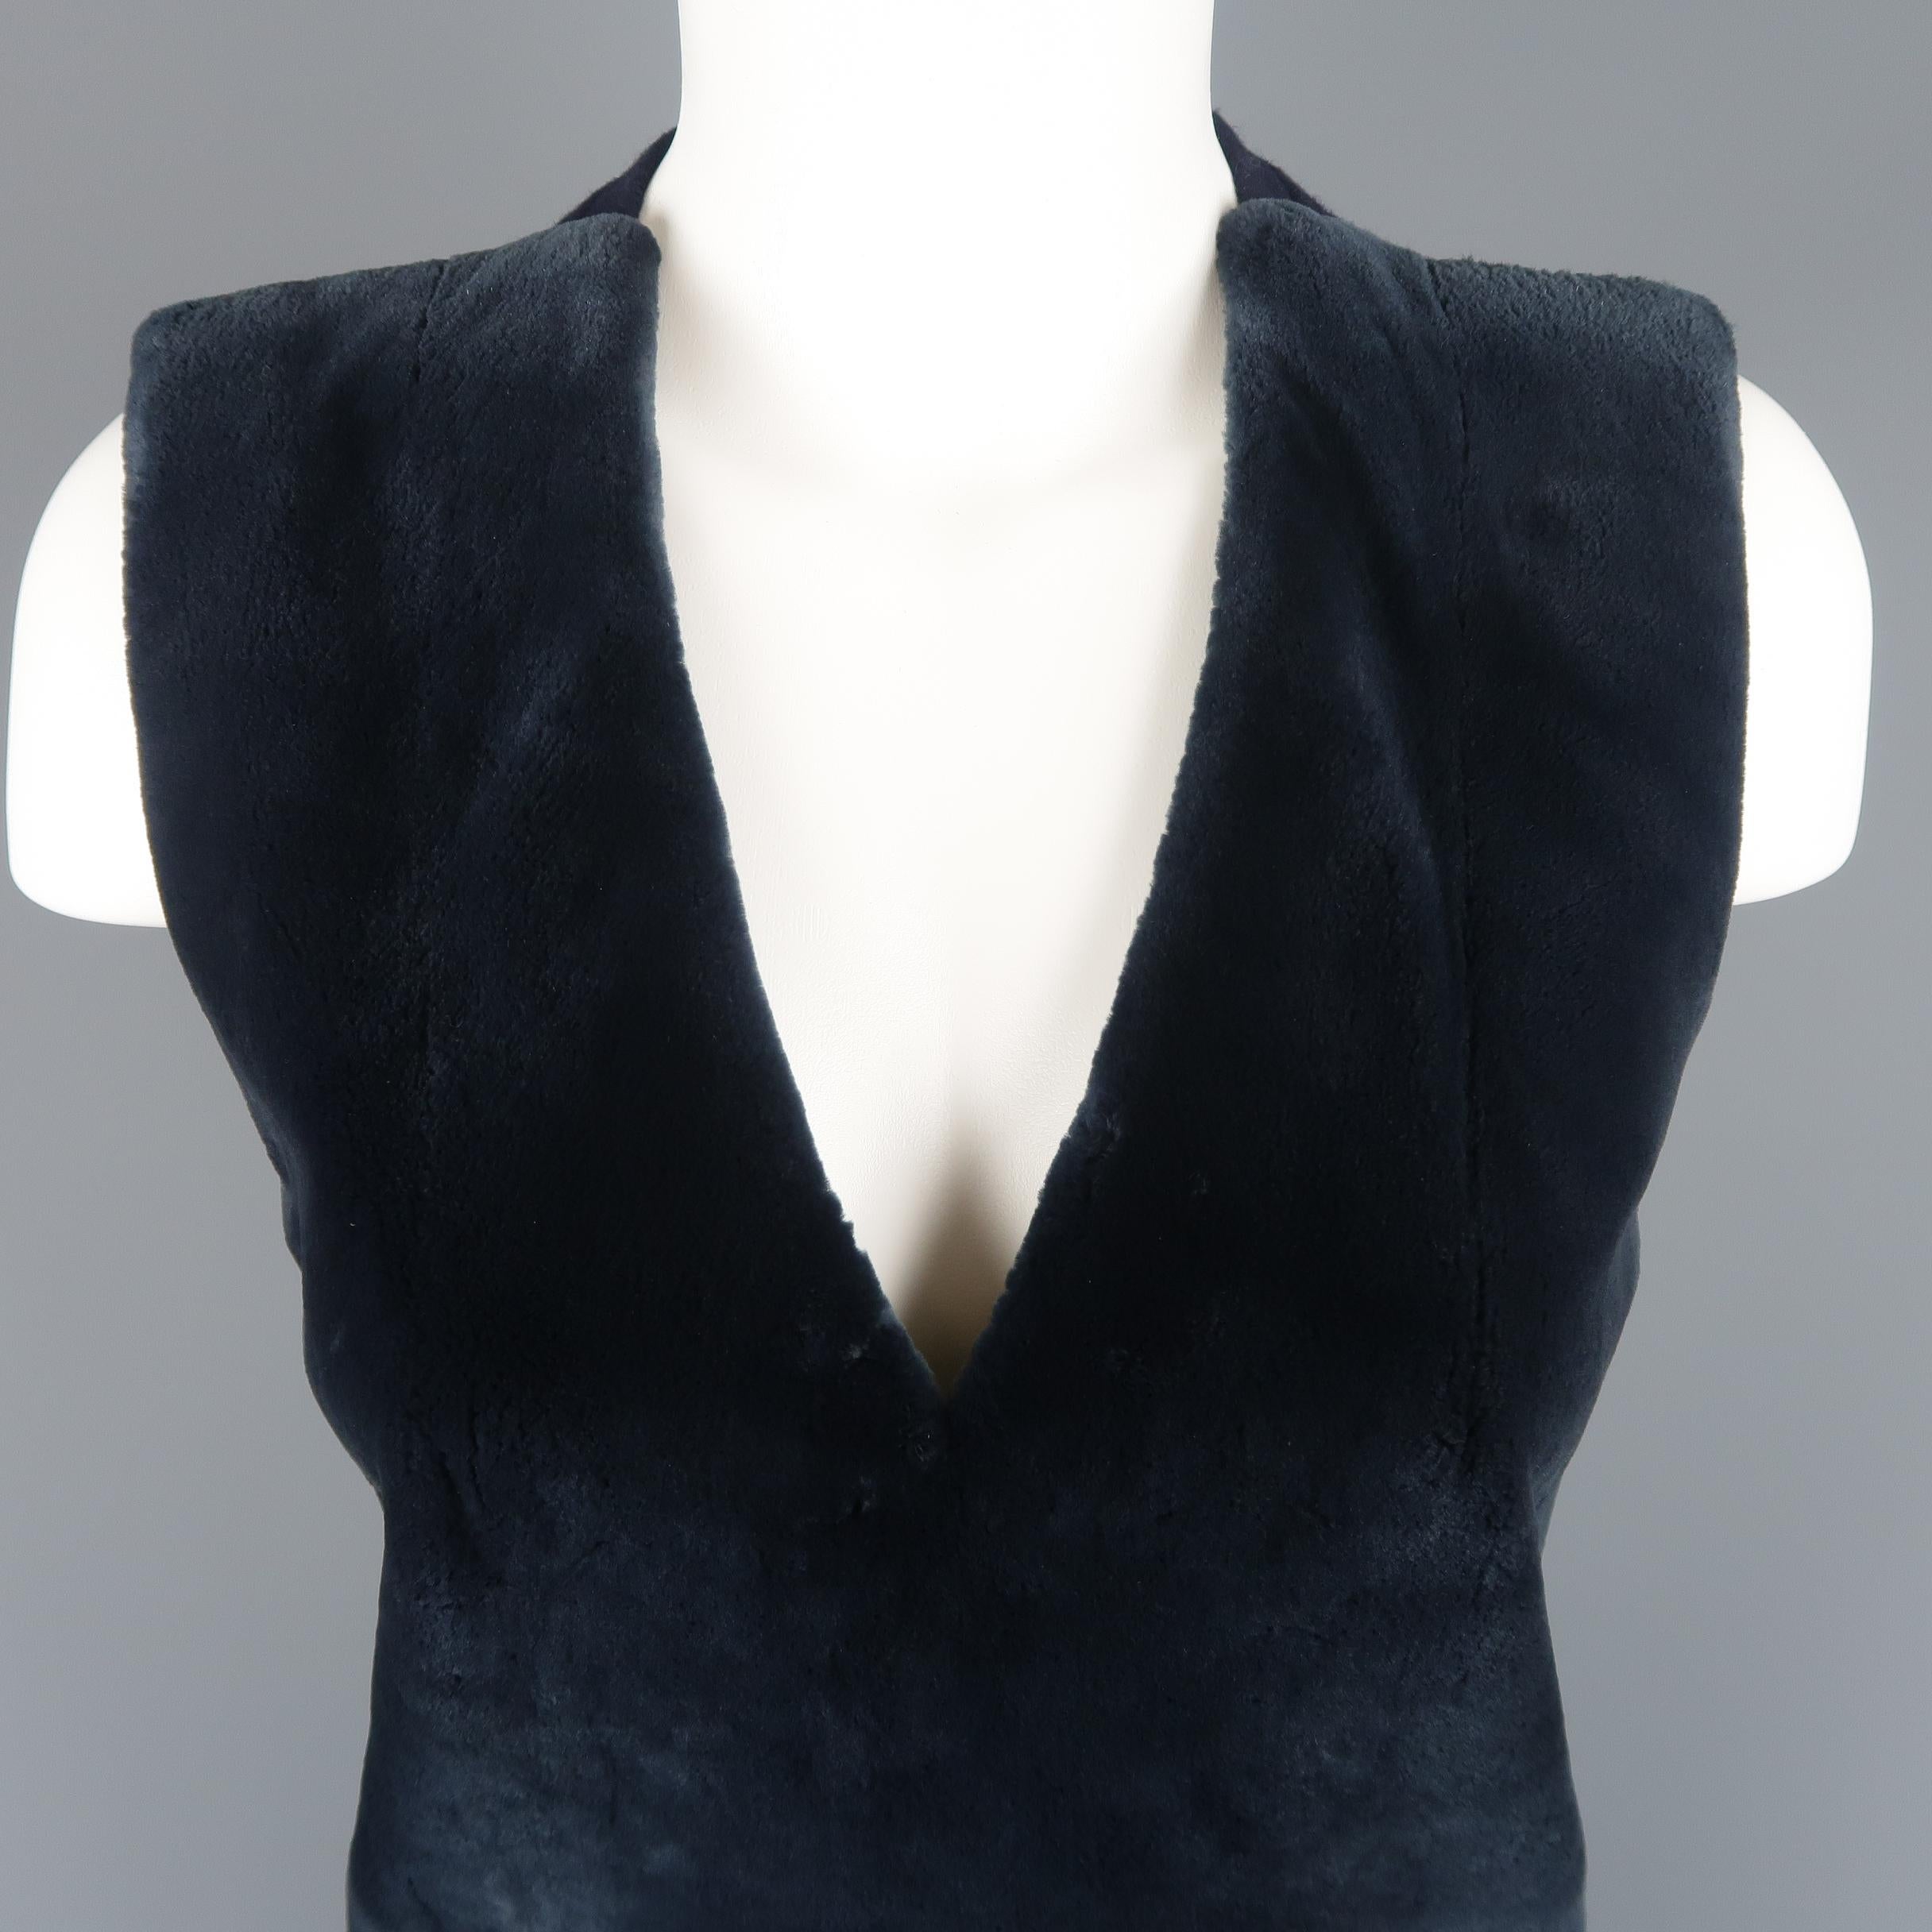 REED KRAKOFF vest comes in navy blue wool knit with a V neck beaver fur frontal panel. Made in USA.
 
Good Pre-Owned Condition.
Marked: 4
 
Measurements:
 
Shoulder: 14 in.
Bust: 34 in.
Length: 24 in.